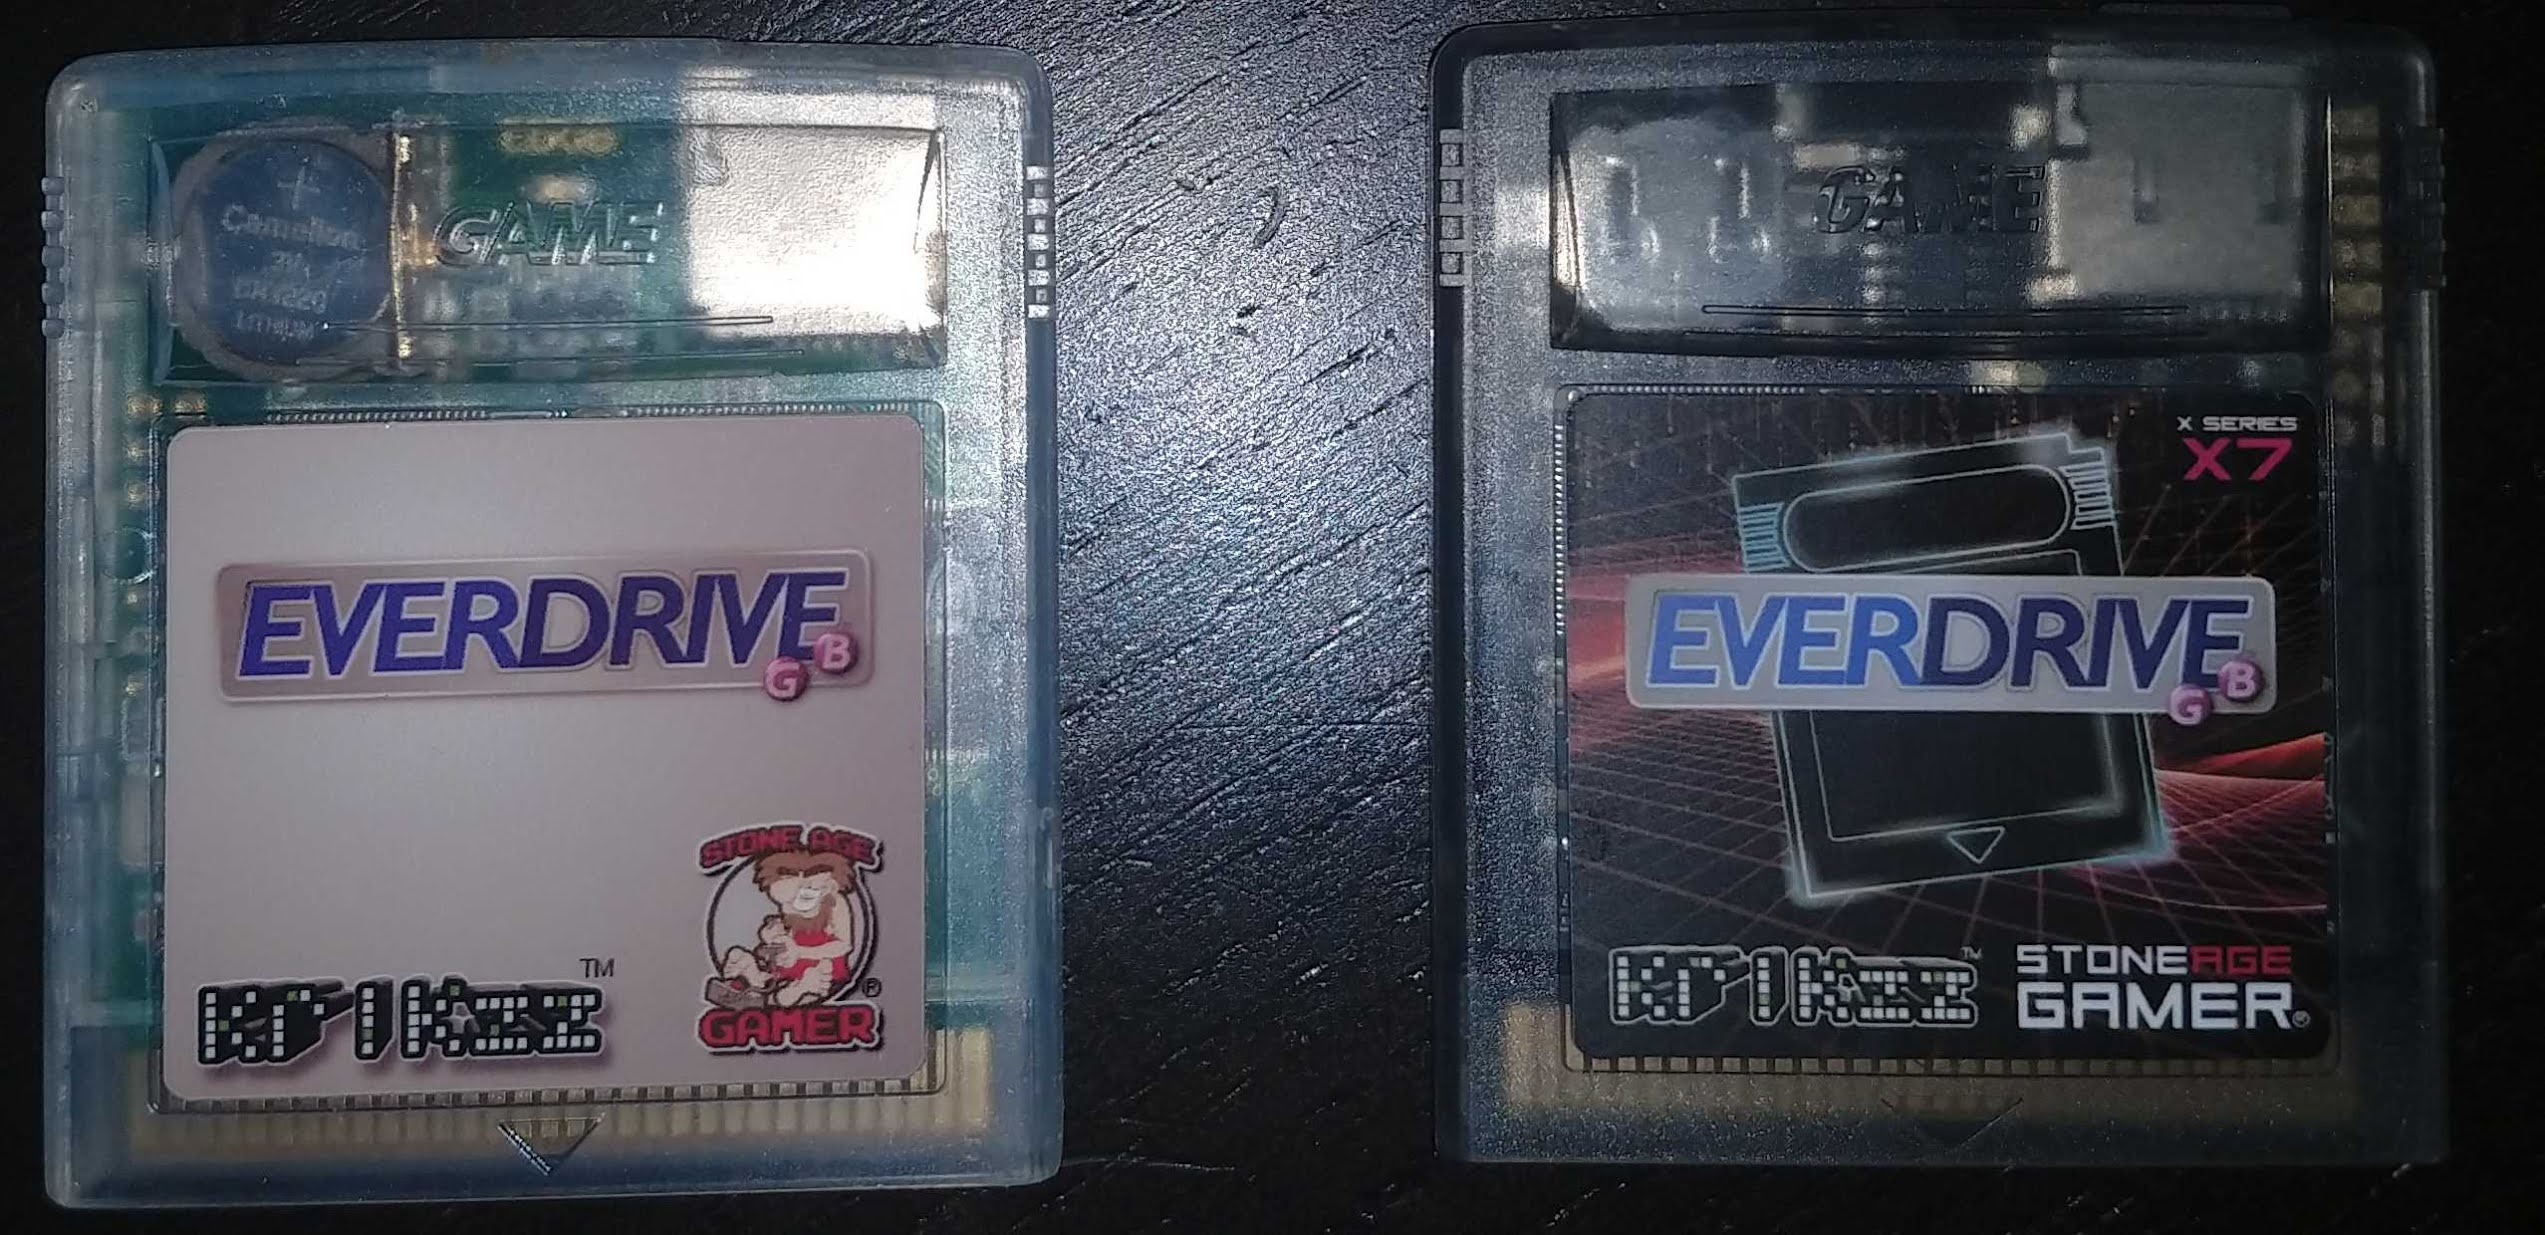 Nerdly Pleasures: The EverDrive GB X7 - The Ultimate 8-bit Game